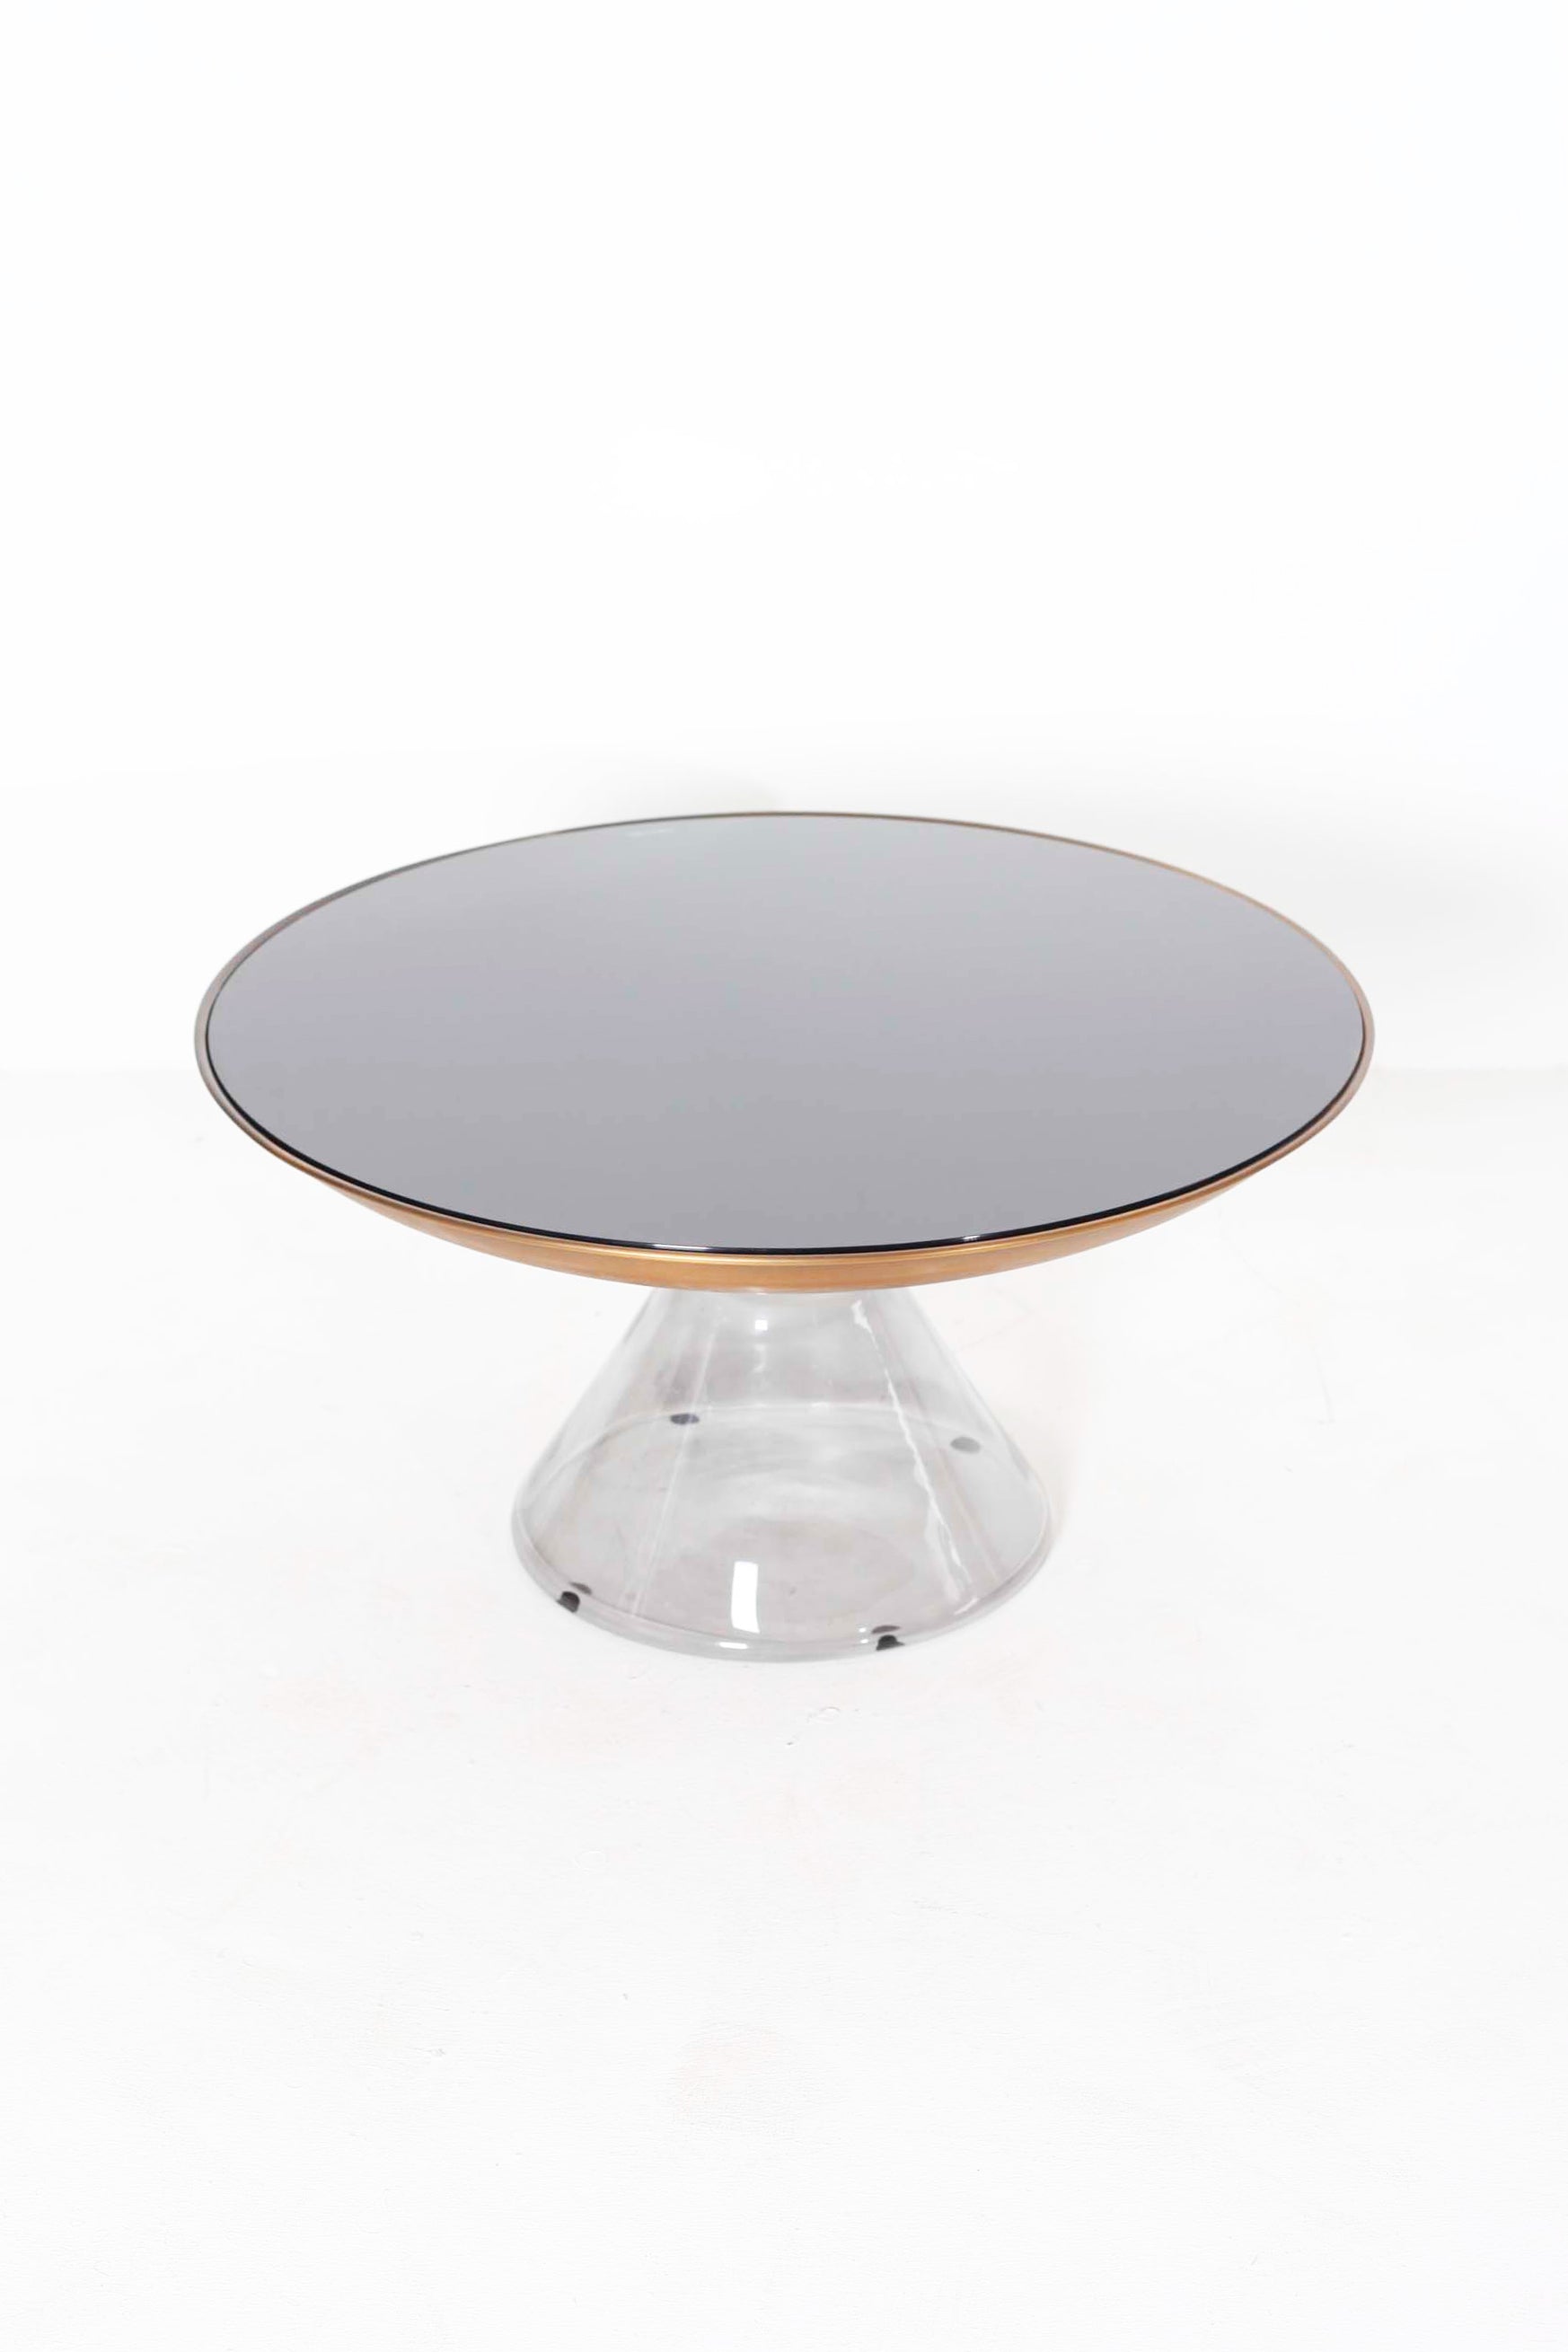 Large Round Coffee Table With Glass Base & Bronze Trim